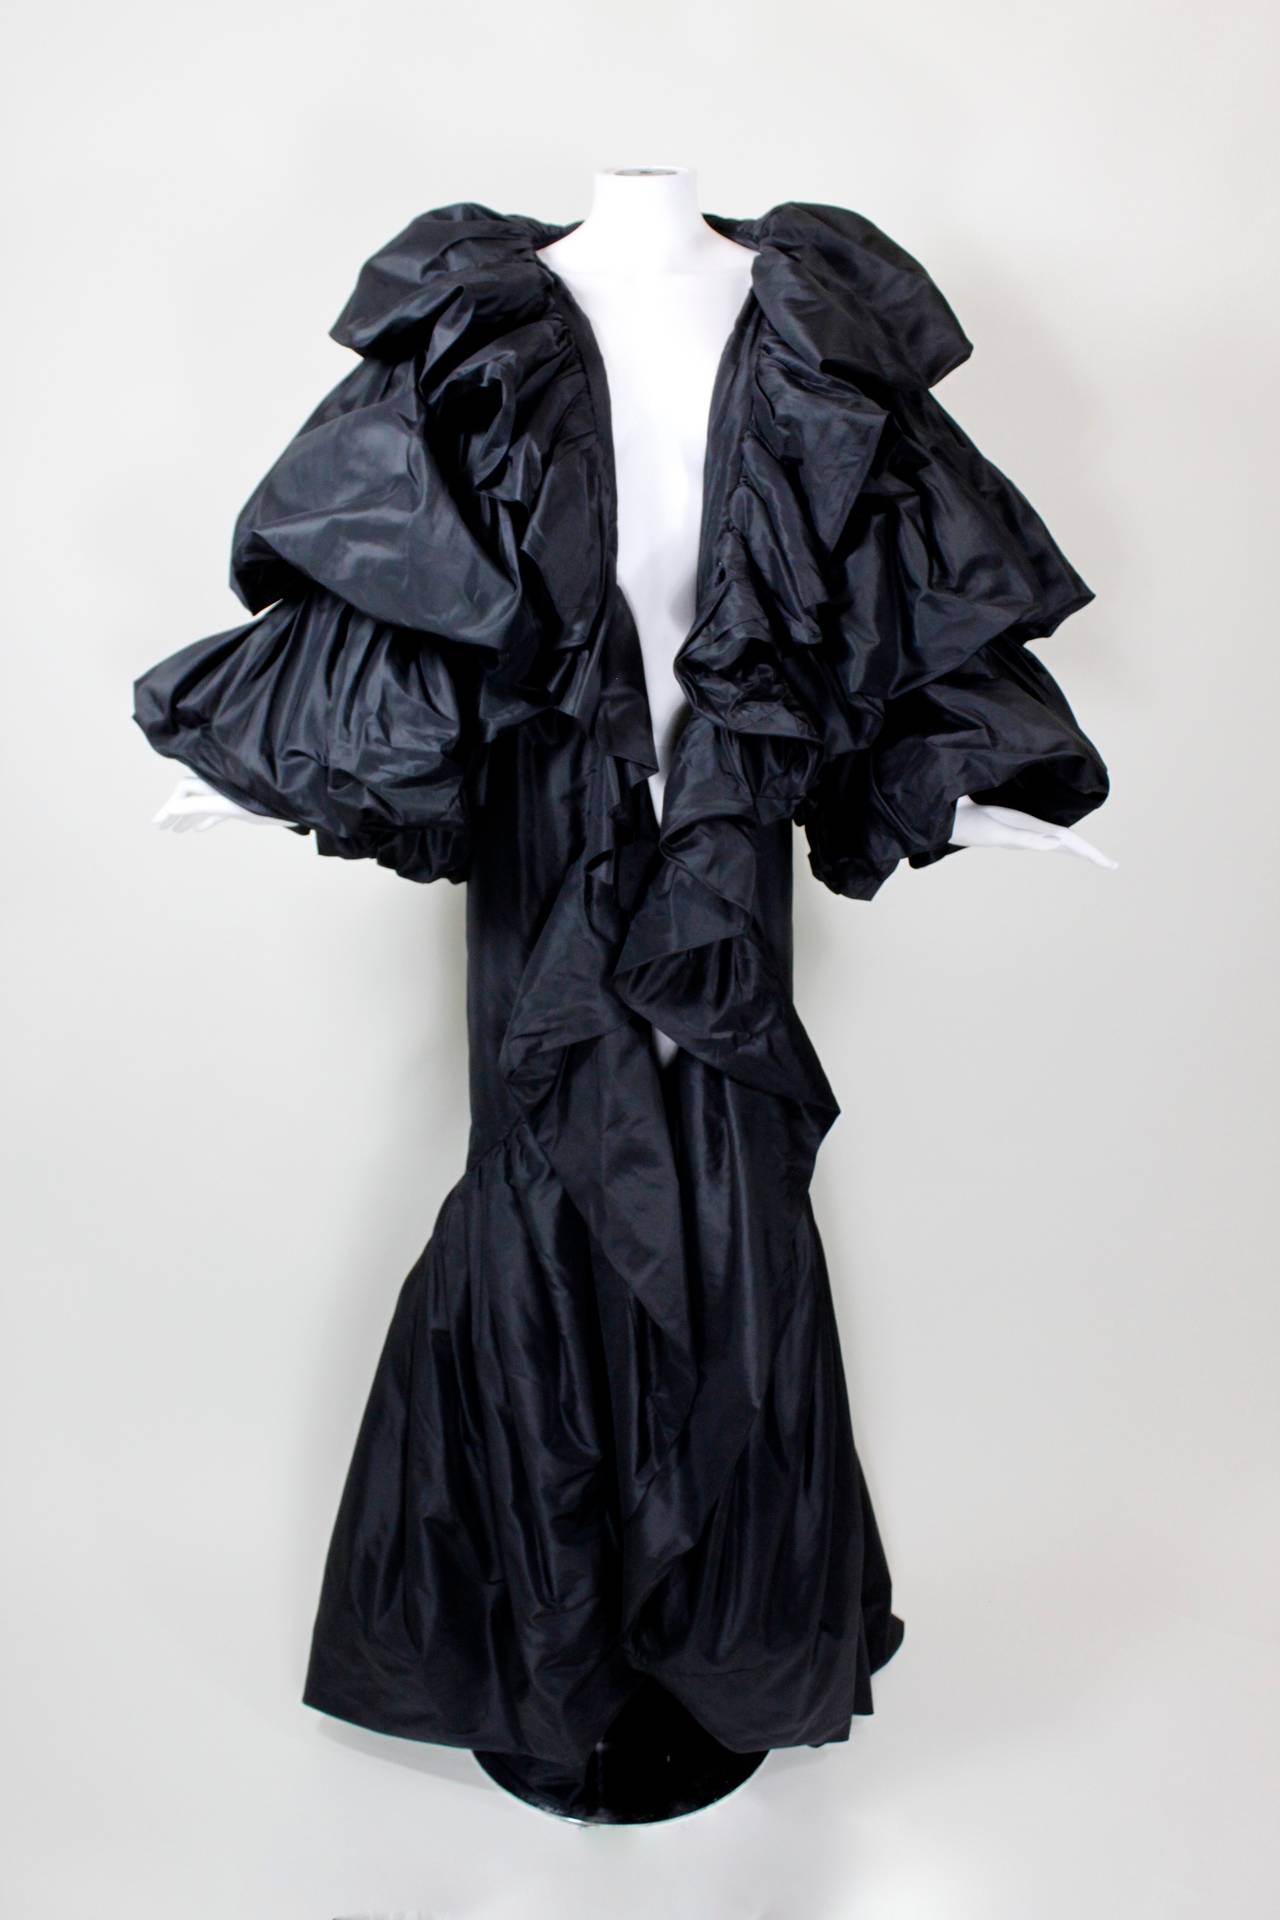 A fabulous, full-length statement evening coat, done in tiered, billowing taffeta. Attributed to Bellville Sassoon.

This cape would best fit a US 2 or 4.

Measurements--
Bust: 34 inches
Waist: free
Hip: free